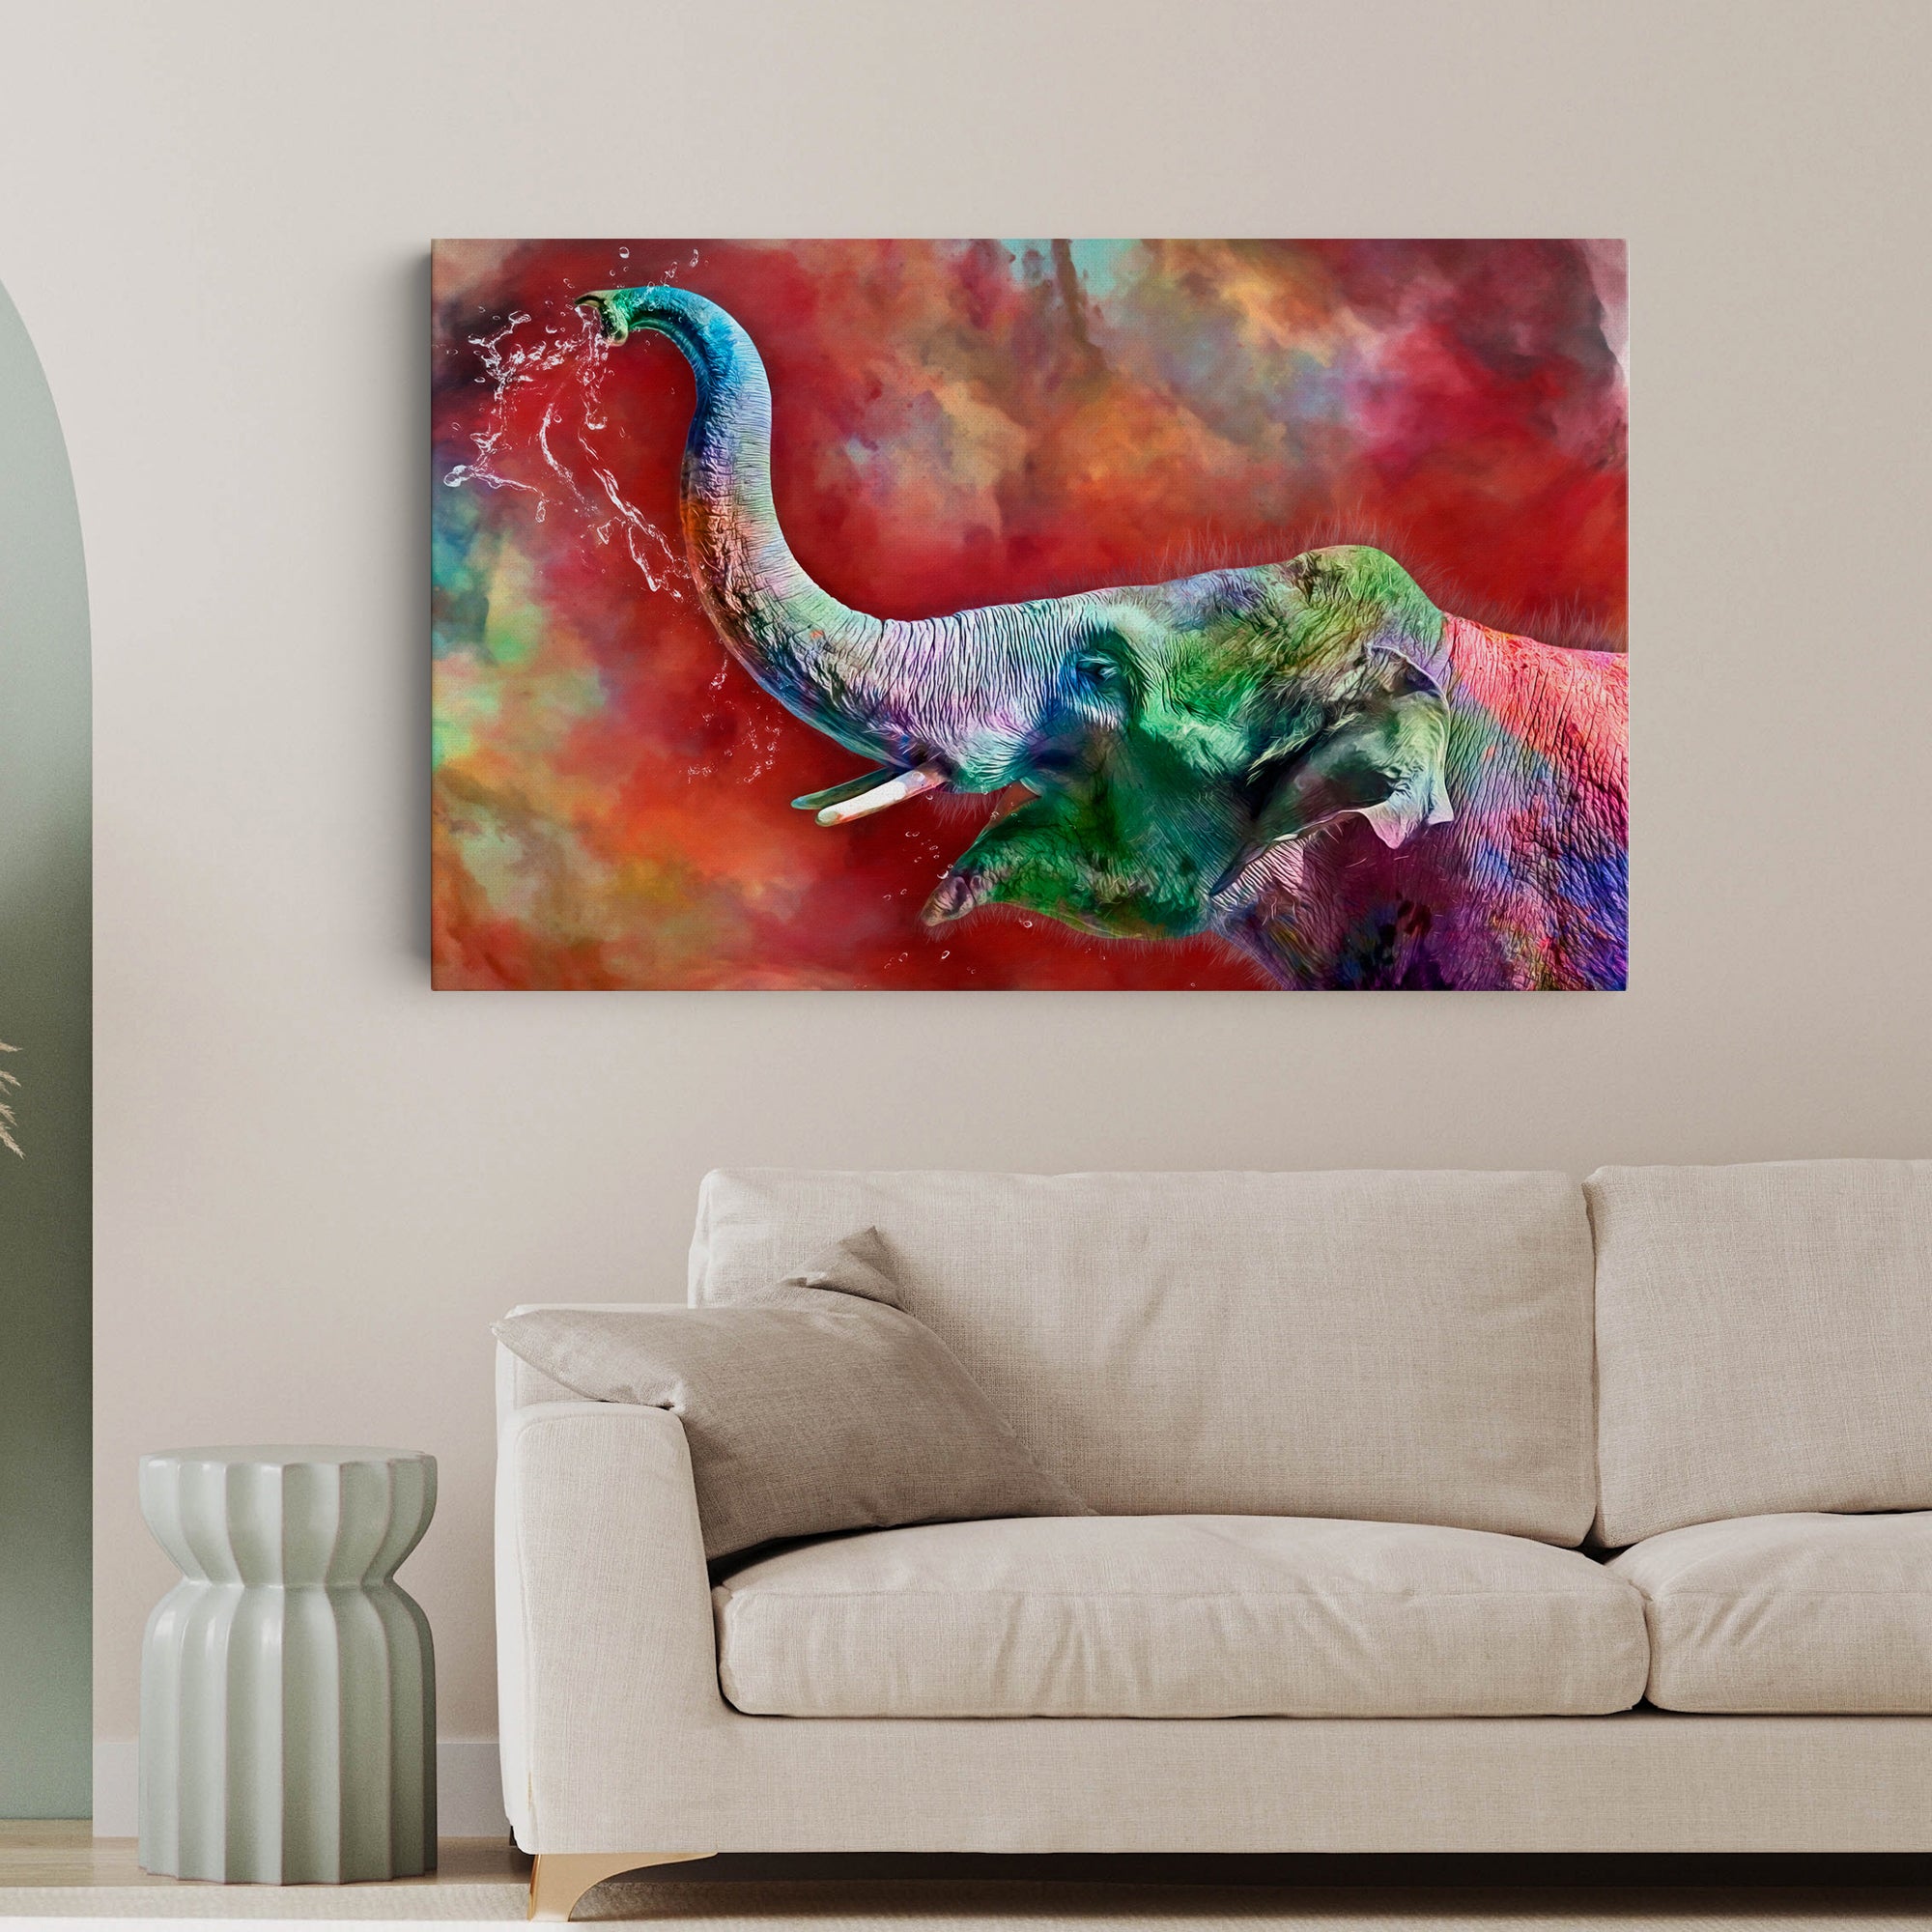 Elephant Abstract Art Wall Painting